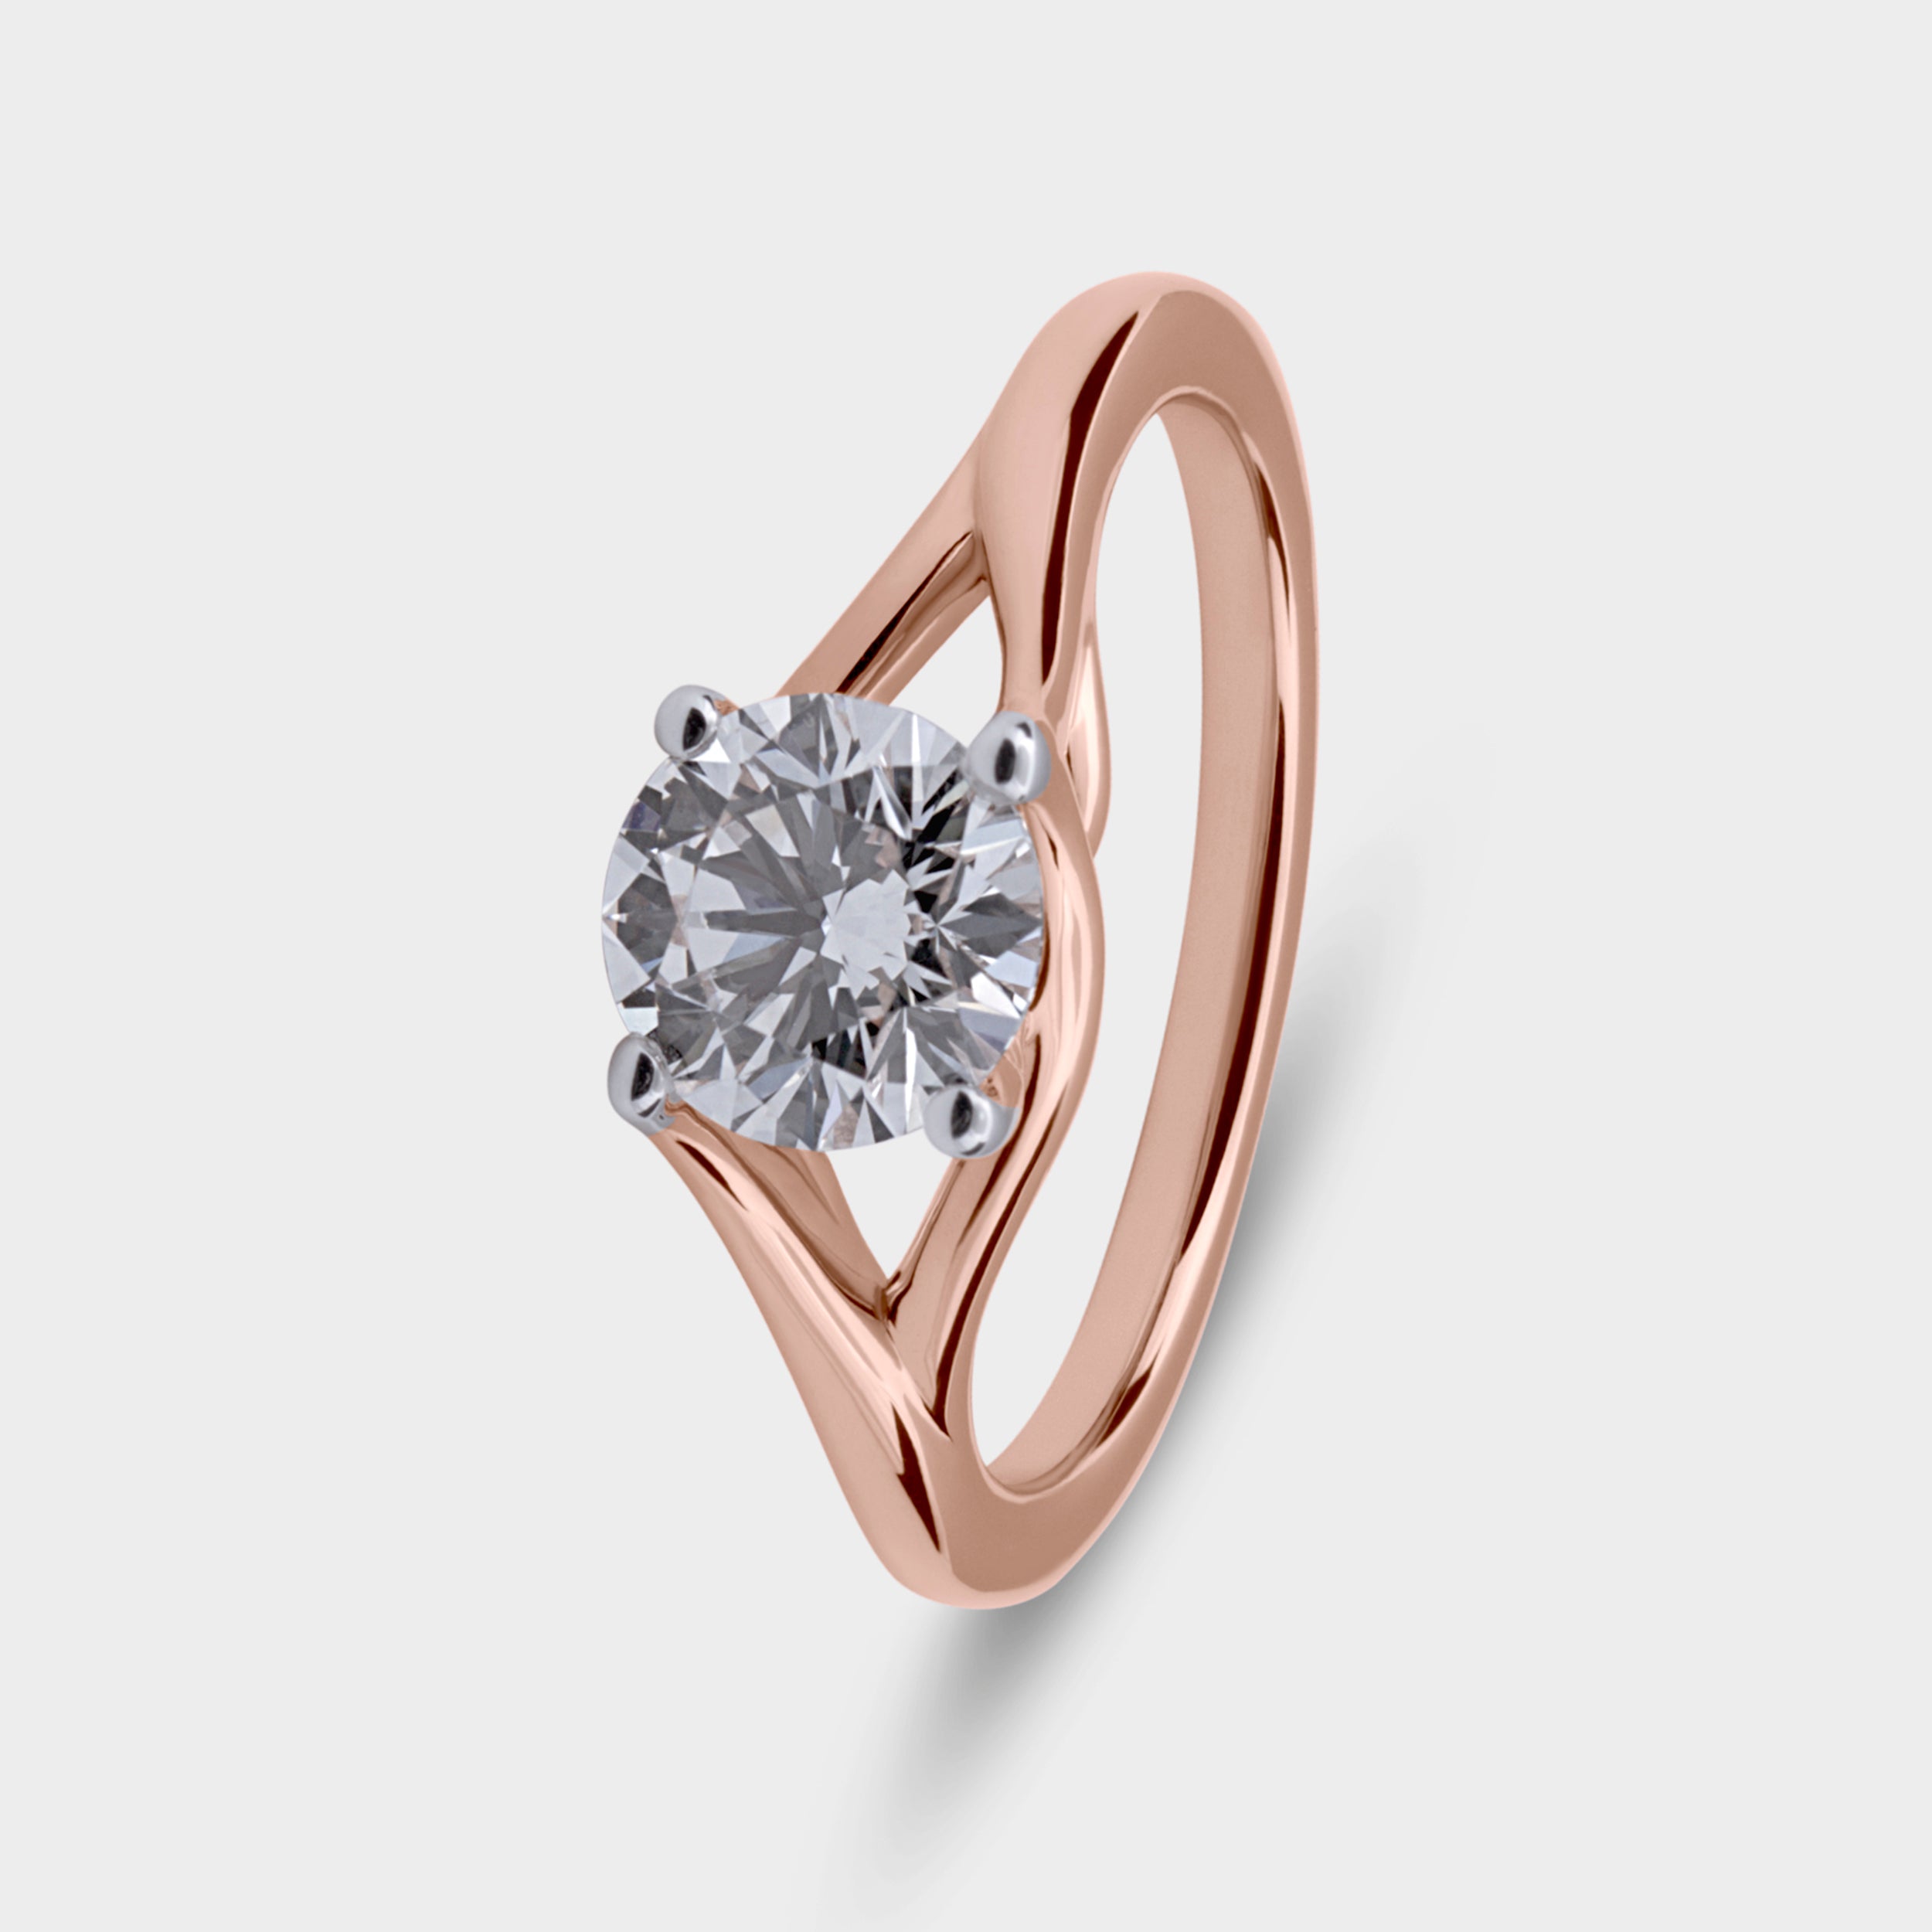 Round Brilliant 1.02 Carat Solitaire Lab-Grown Diamond Ring in Rose Gold | SKU : 0019828770